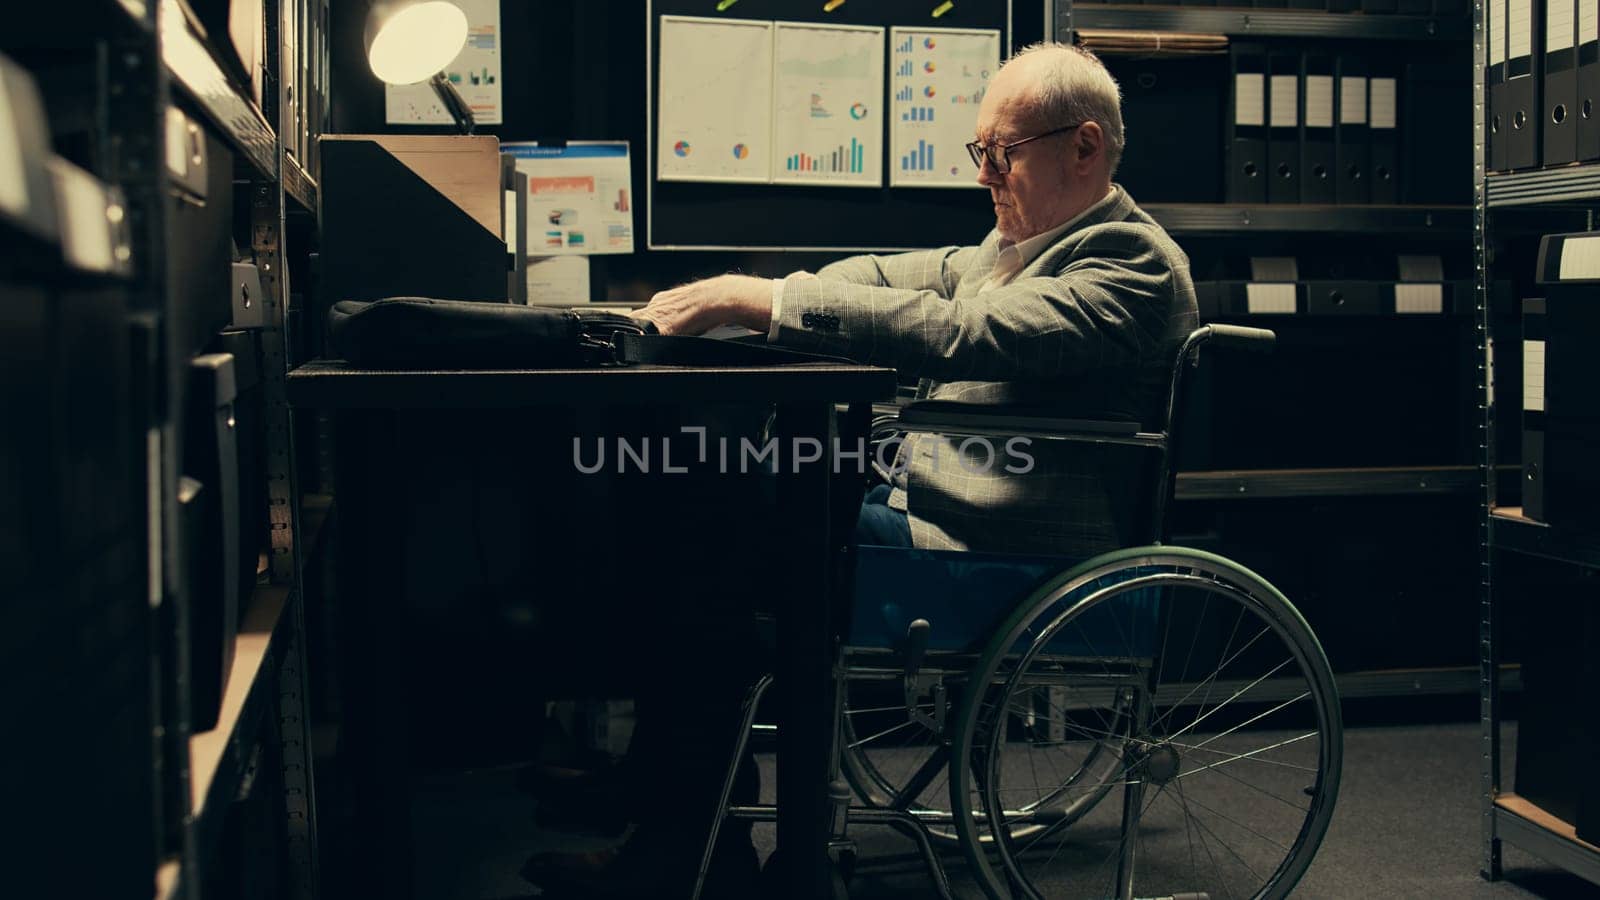 Paralyzed senior inspector reviewing classified case records in incident room by DCStudio